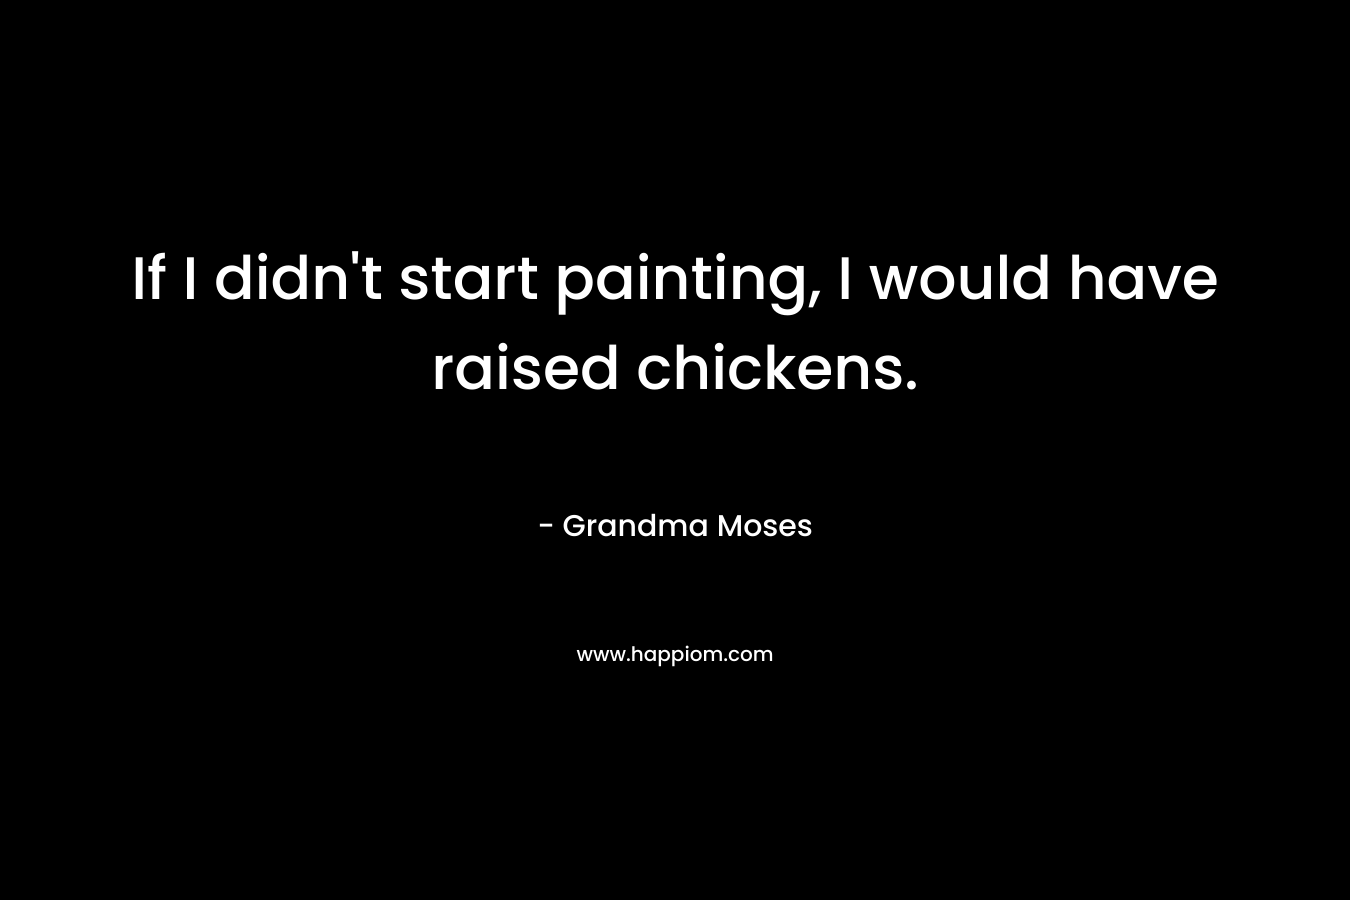 If I didn’t start painting, I would have raised chickens. – Grandma Moses